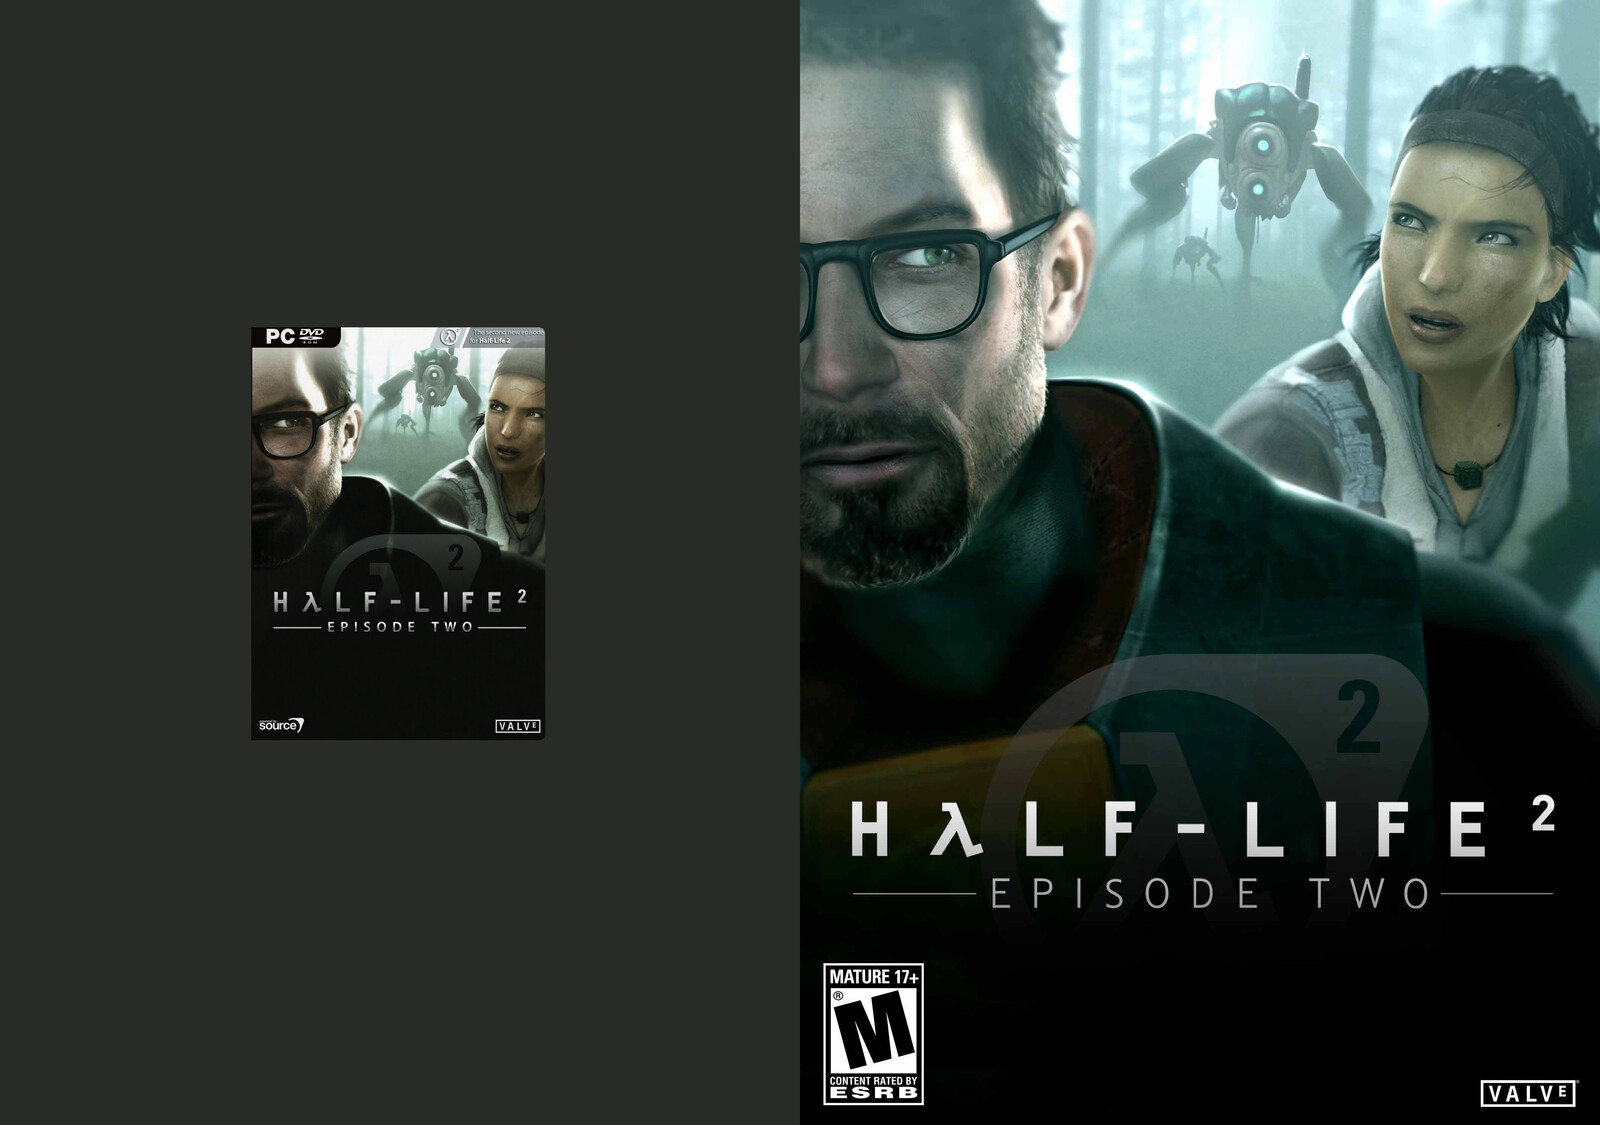 Half-Life 2: Episode Two (original scan cover vs. retouched)